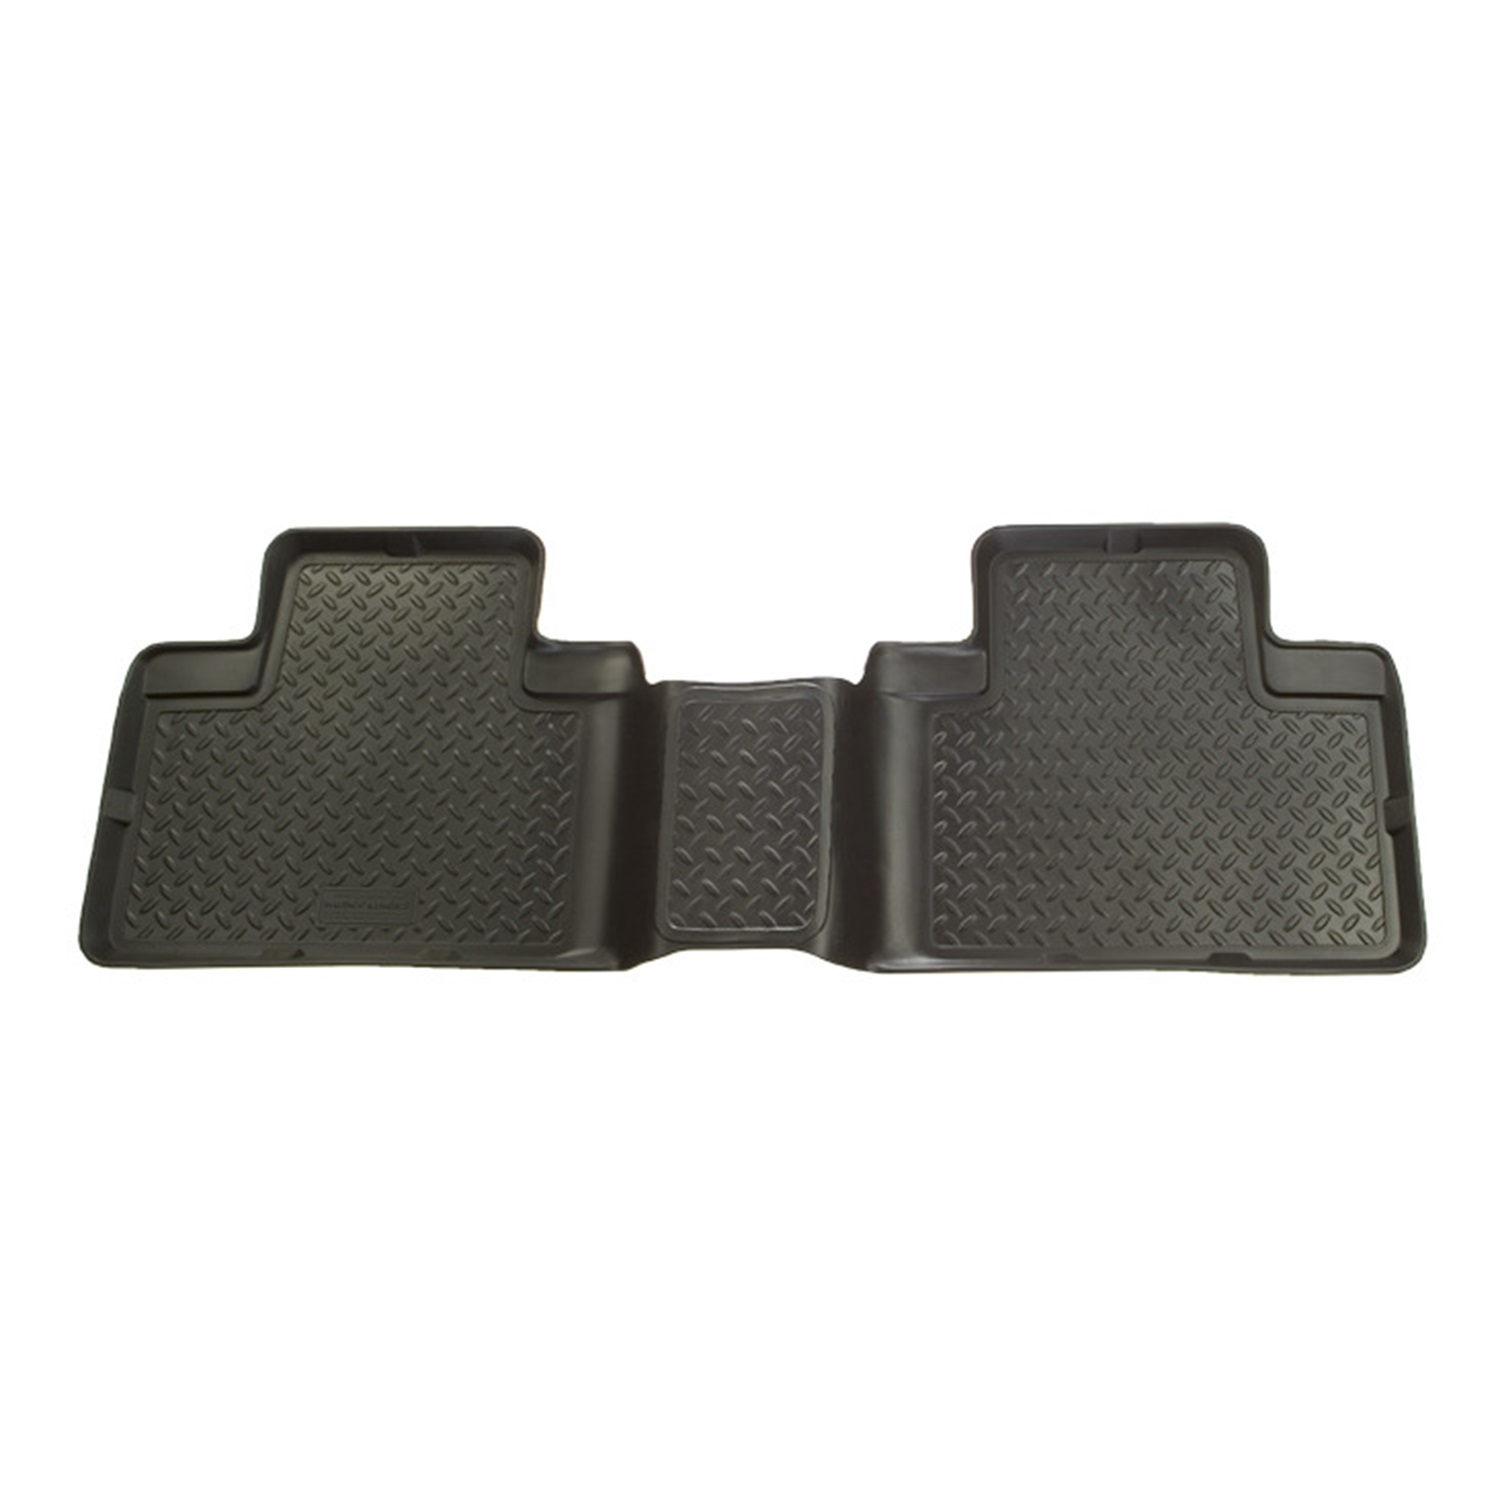 Husky Liners Husky Liners 73531 Classic Style; Floor Liner Fits 07-14 Expedition Navigator